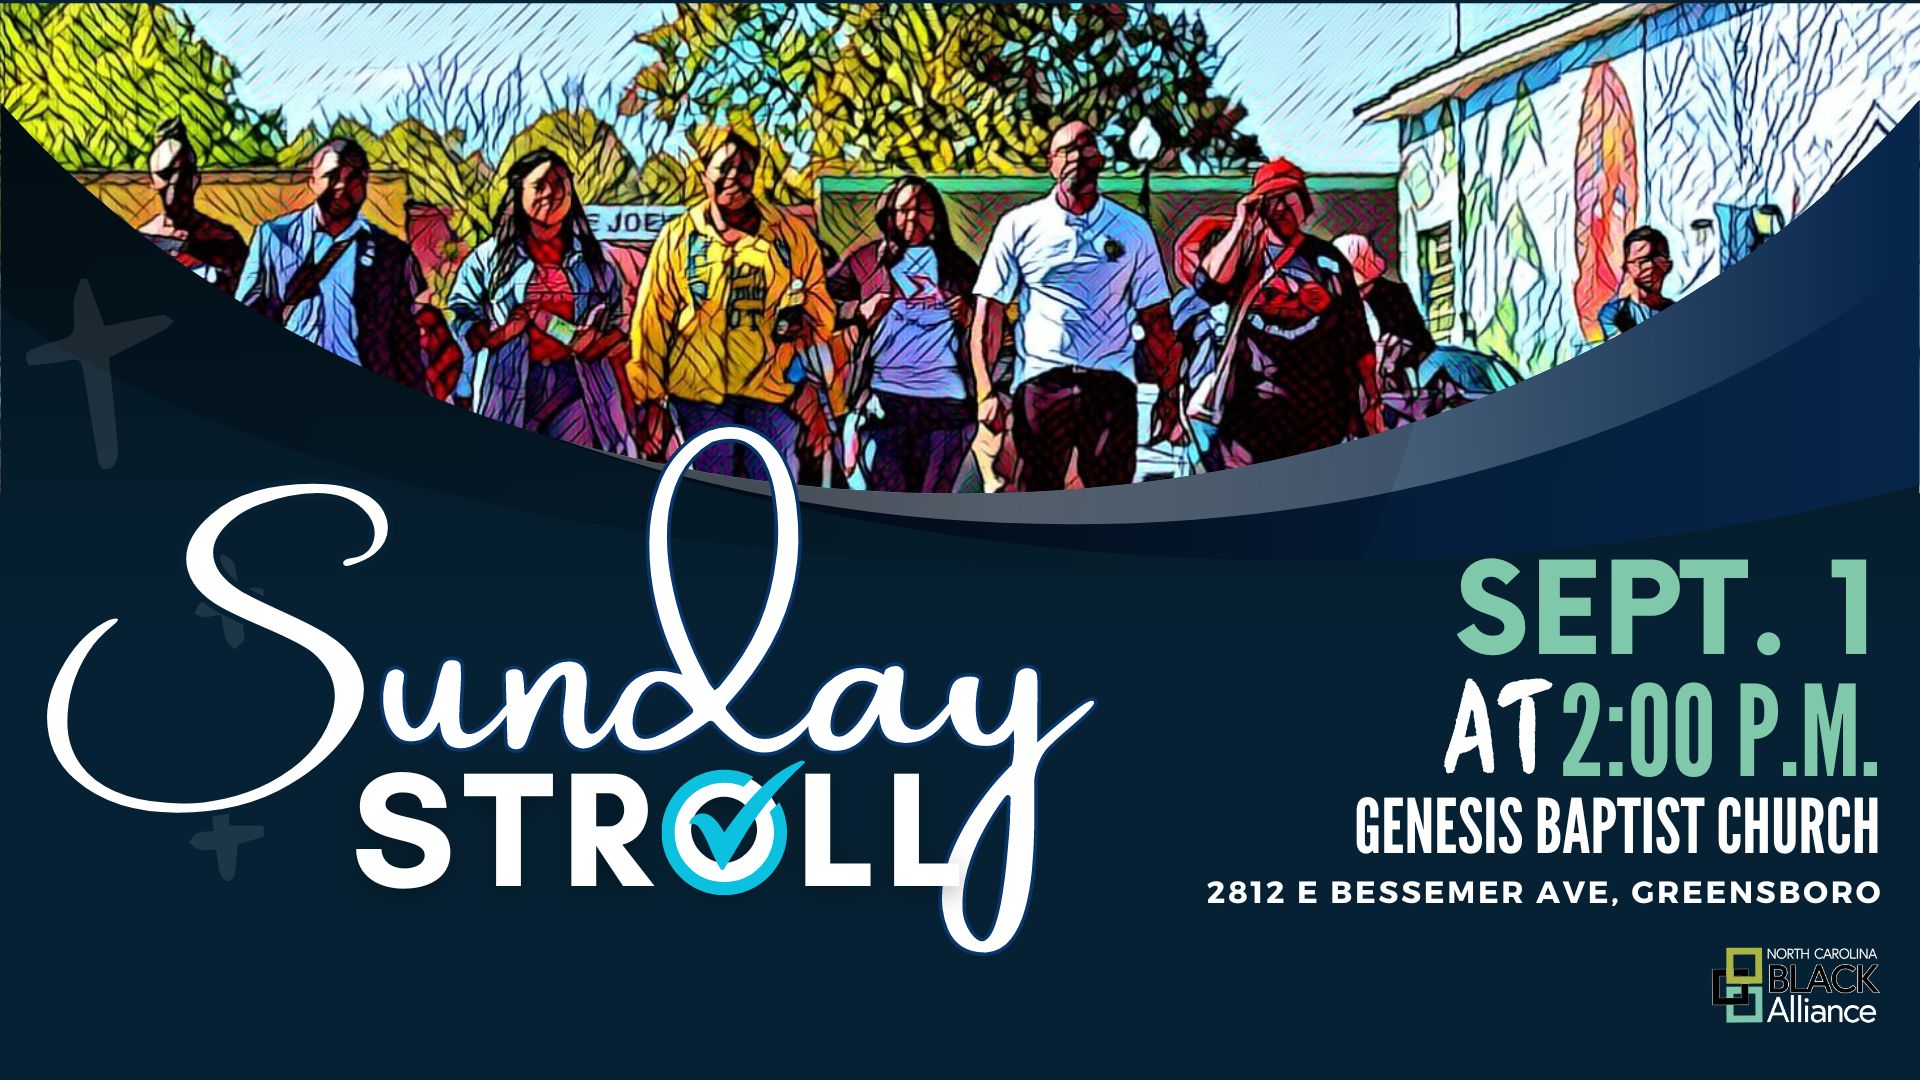 Sunday Stroll on September 1st at 2:00 pm in High Point